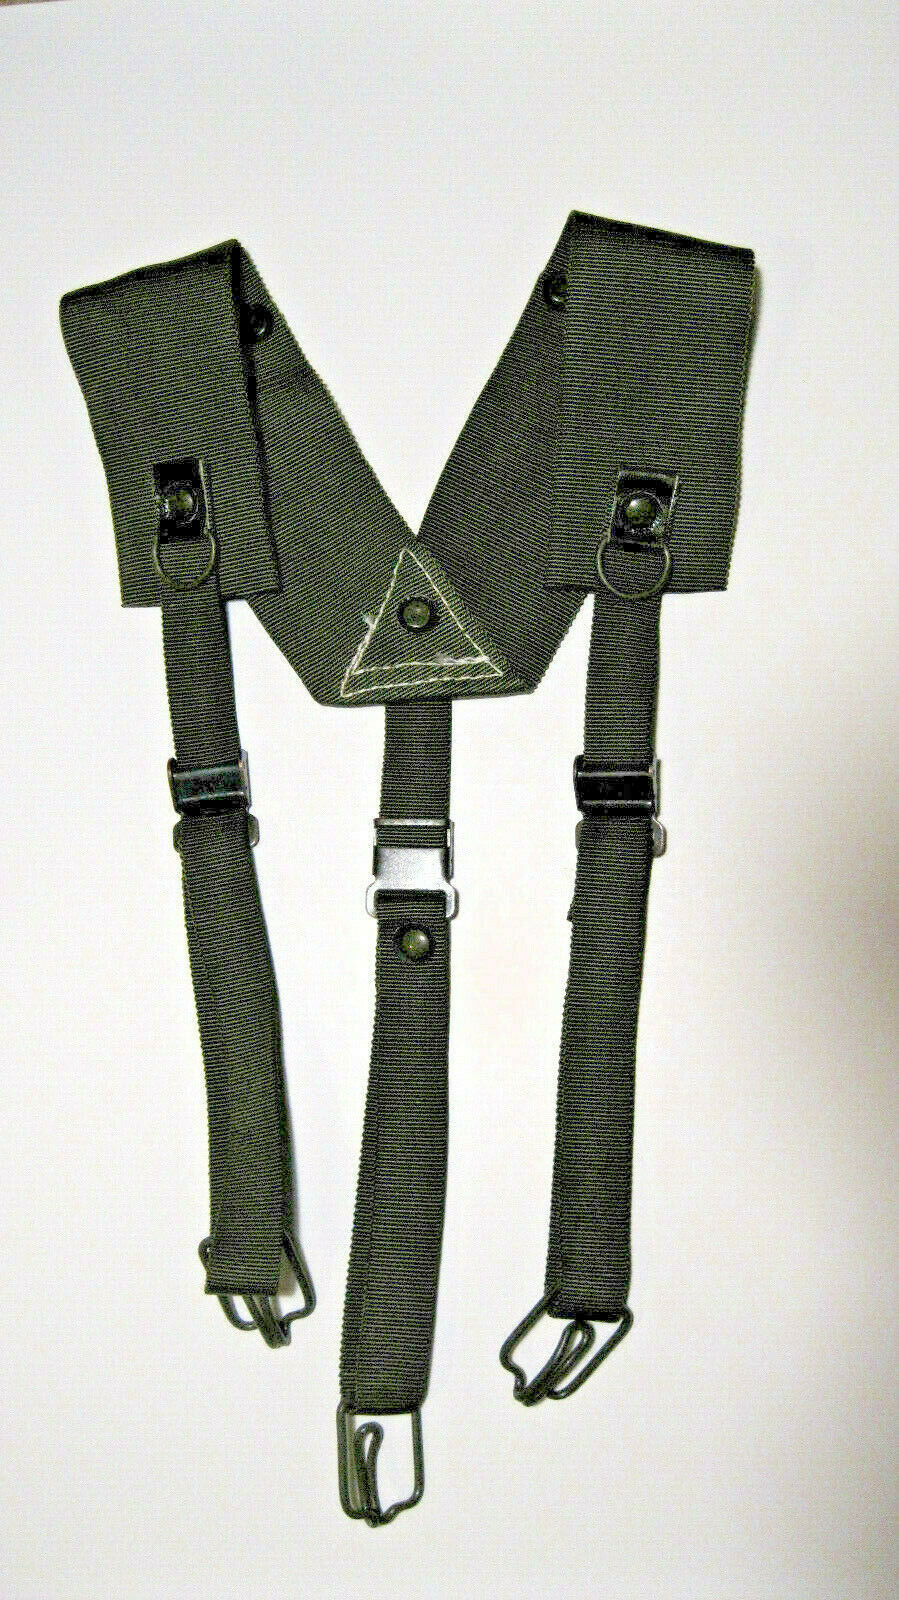 Czech Army Vz85 Harness Suspenders For Belt And Battle Gear Unissued !